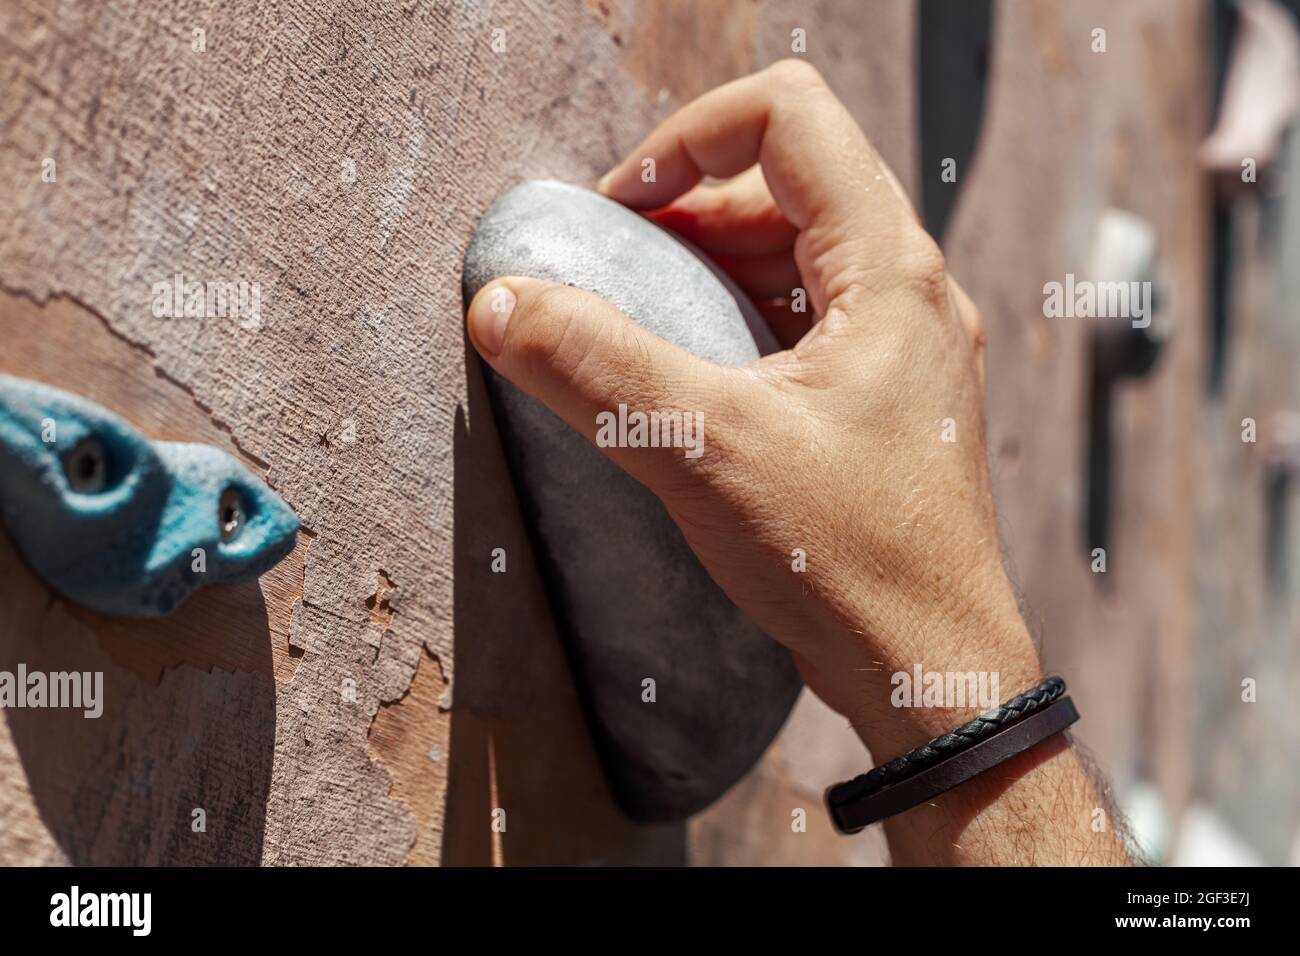 Close-up photo of male hand gripping climbing holds on worn wall outside. Man doing climbing exercise on artificial rock climbing wall at park. Stock Photo